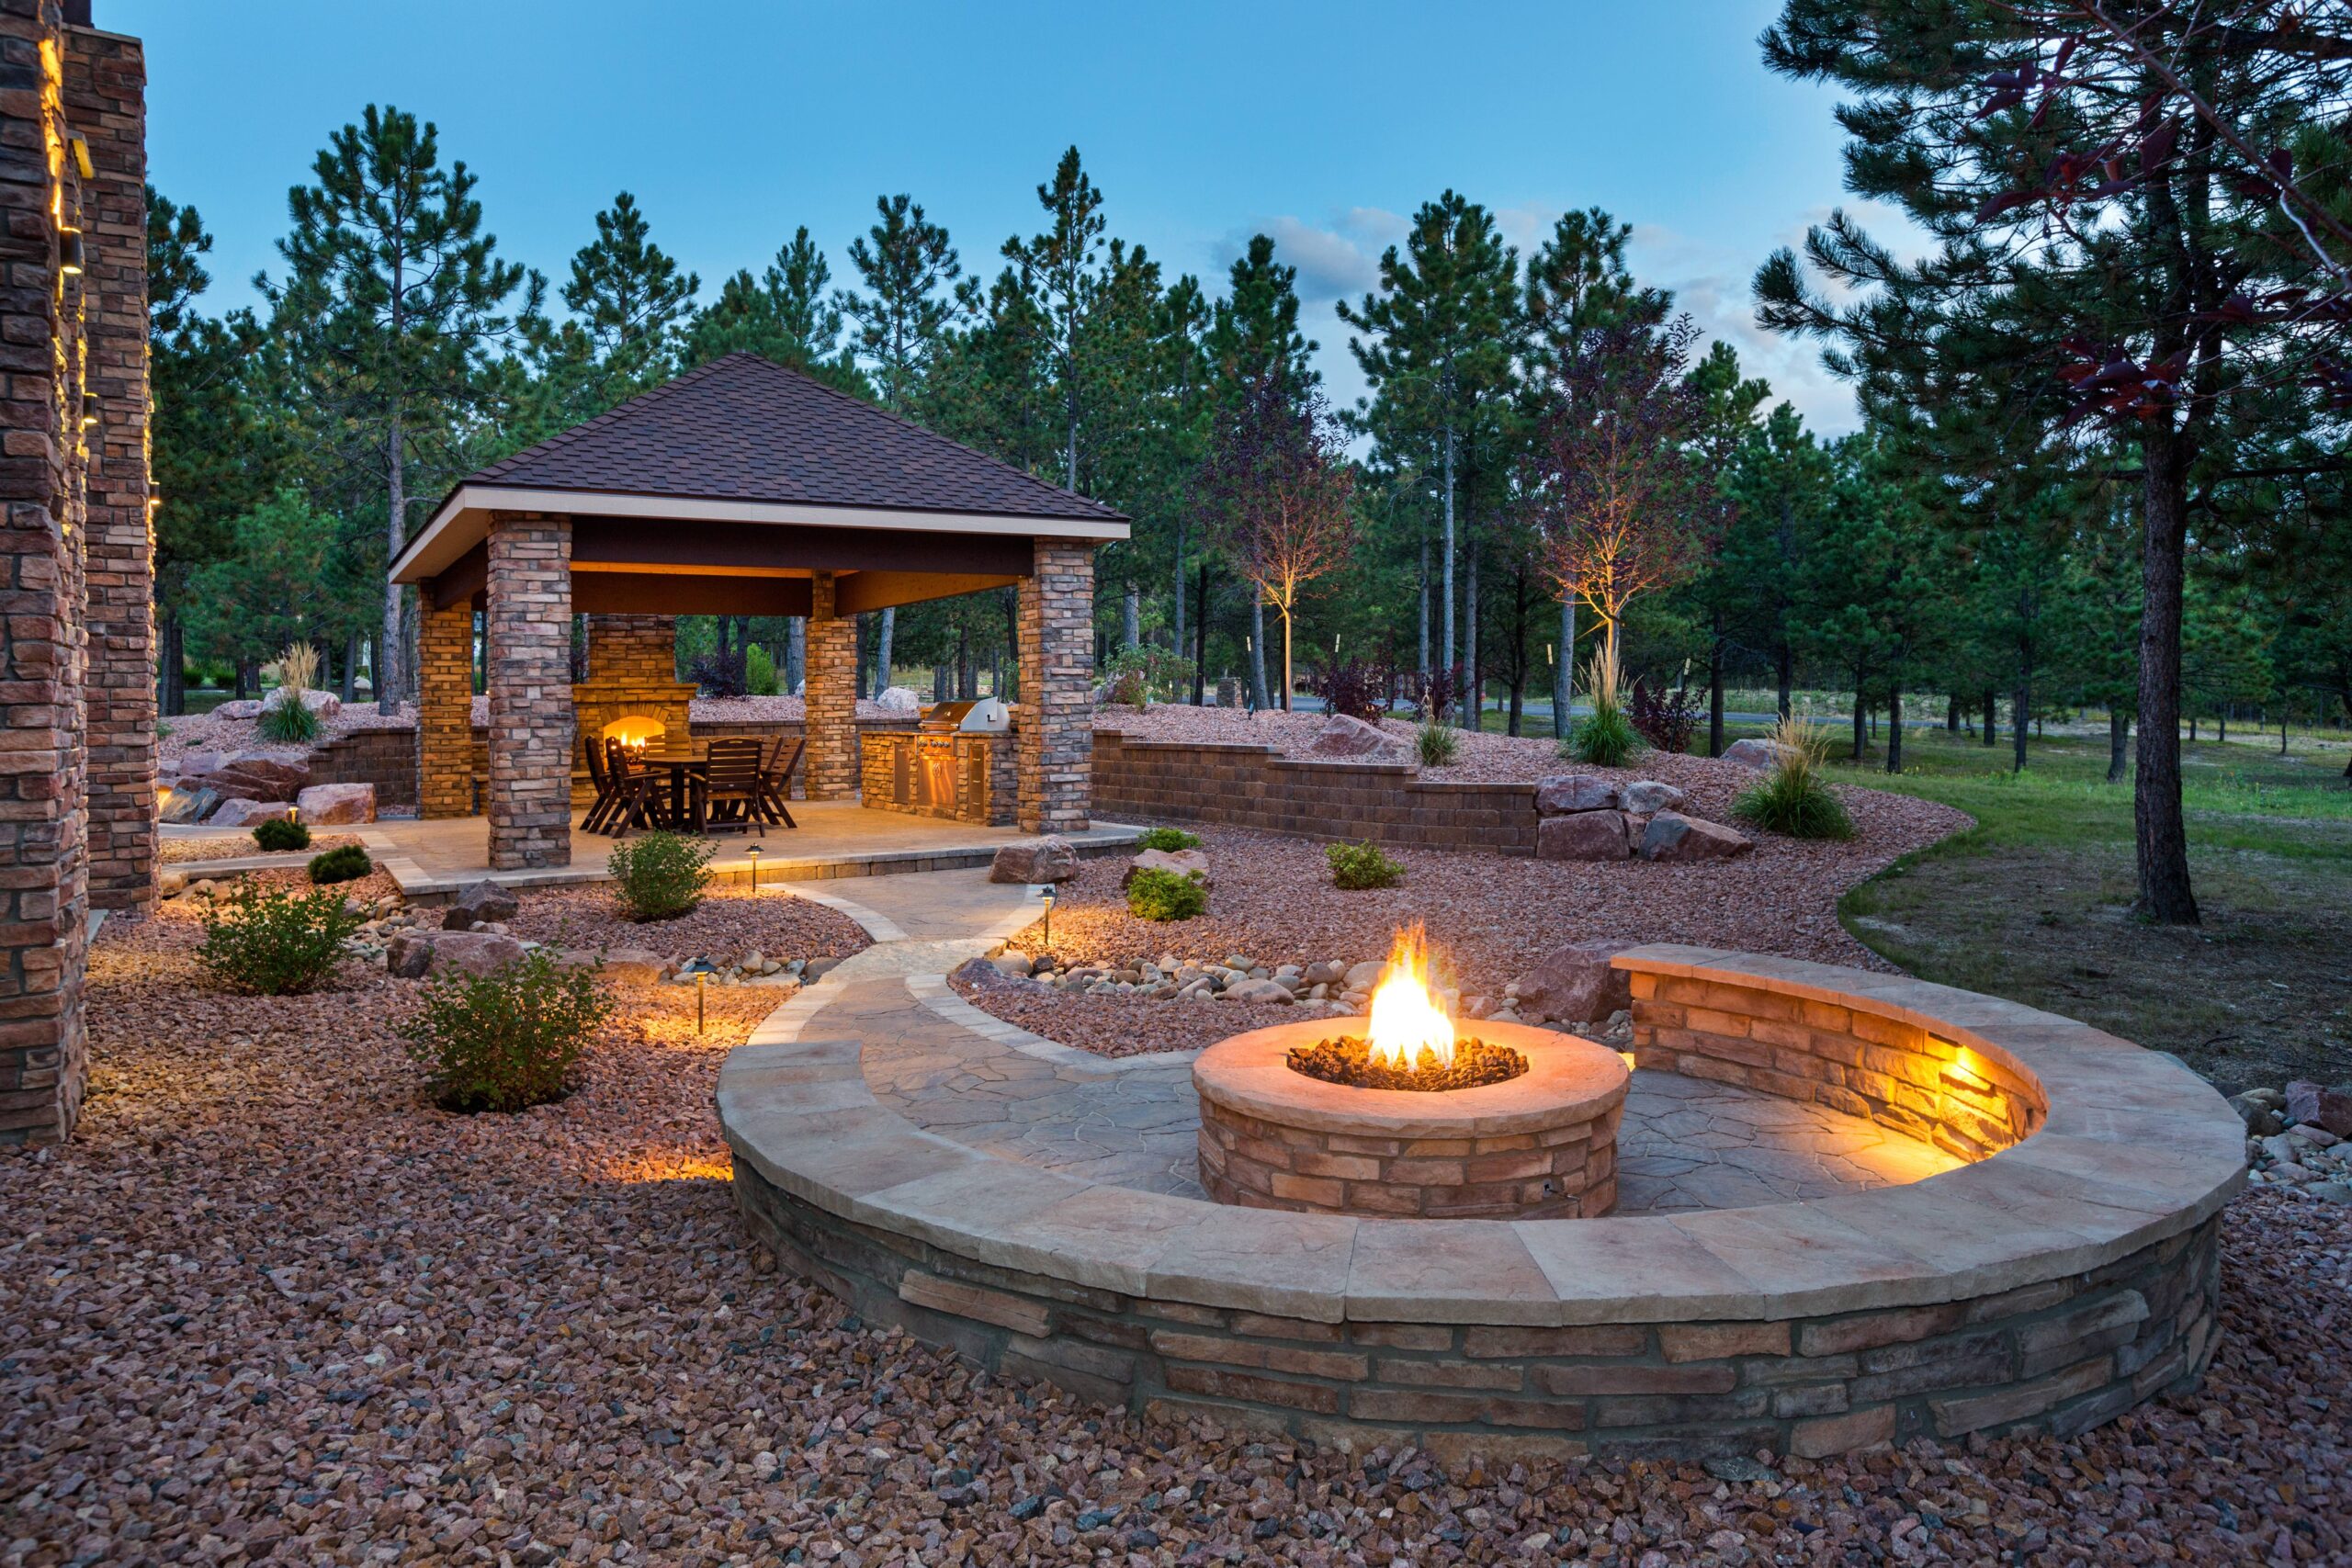 outdoor fireplace, retaining walls, custom patio pavers, outdoor fire pit, walkways, entrances, outdoor living